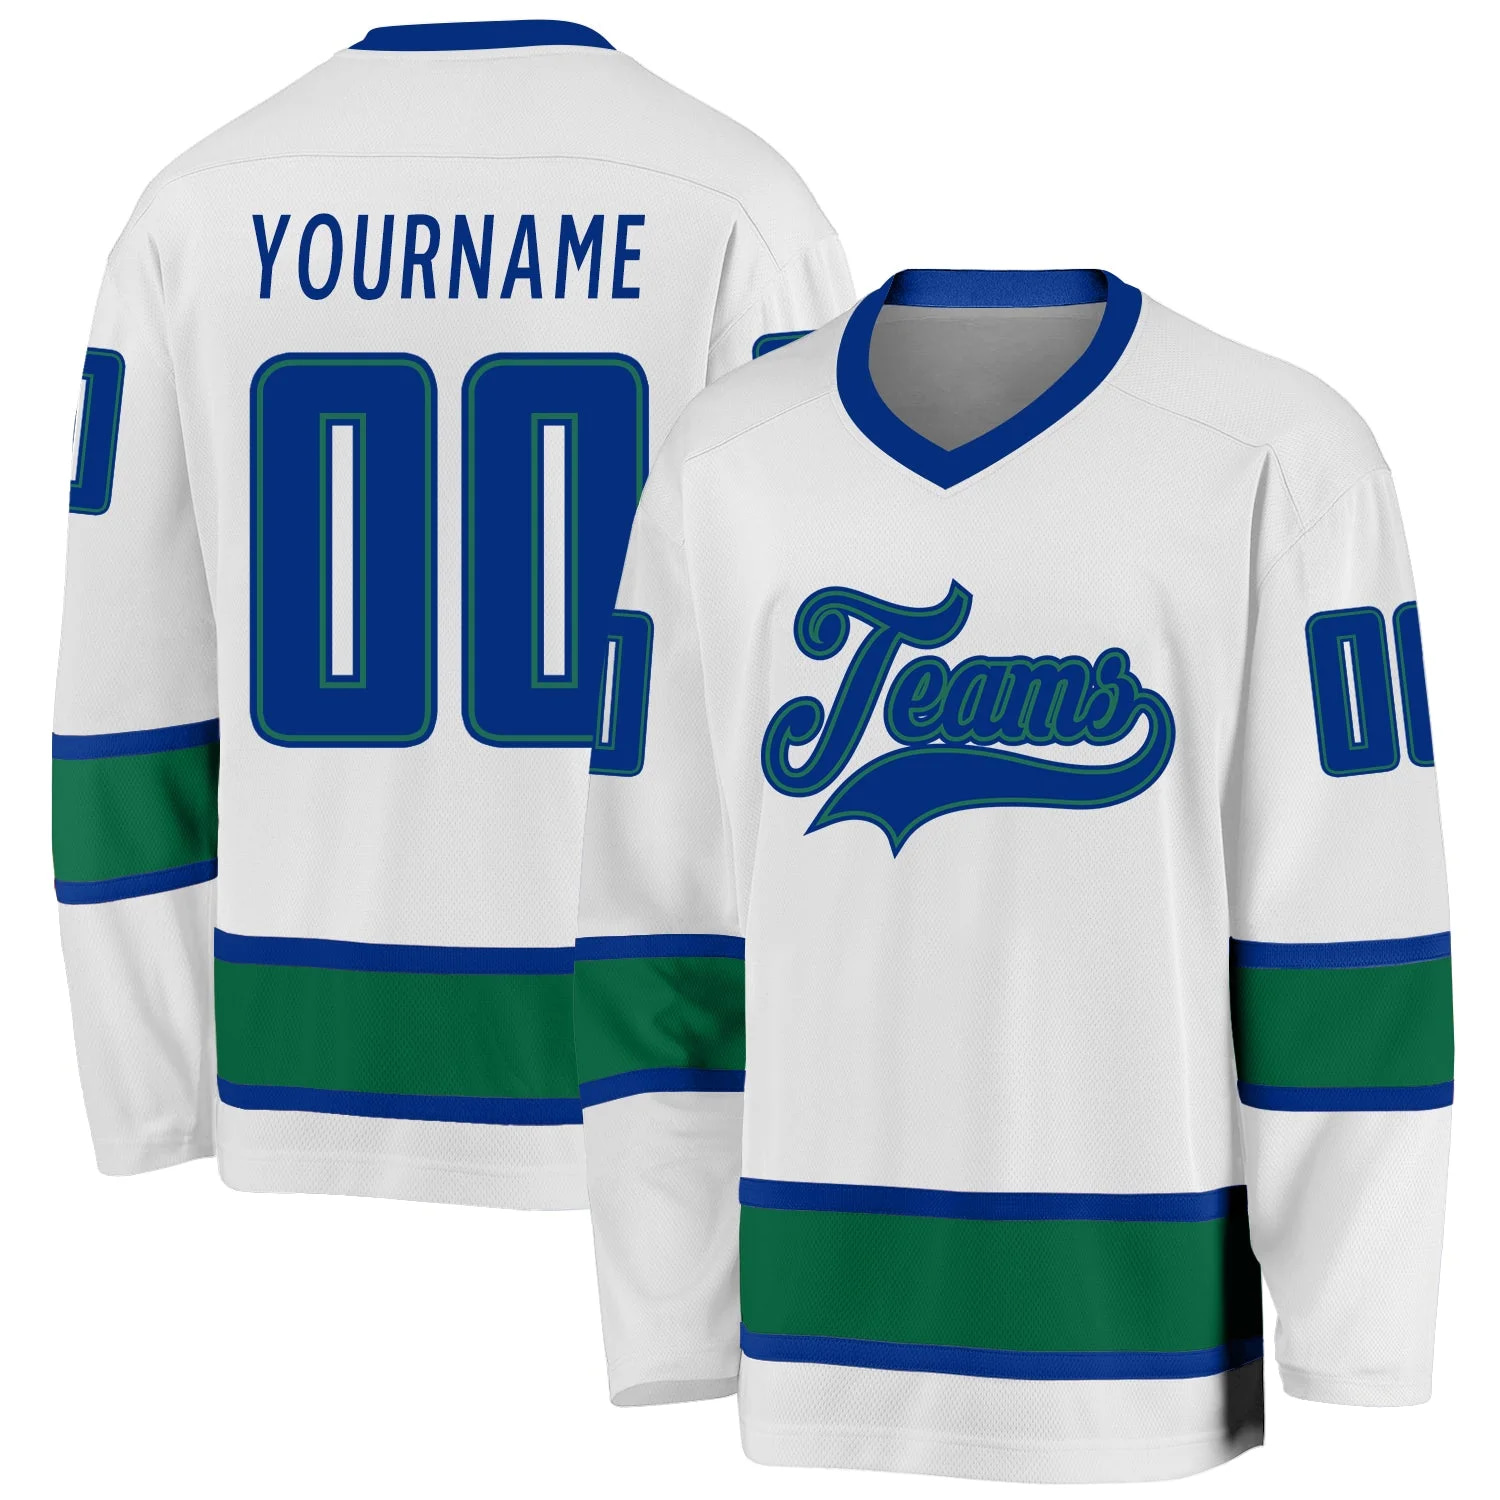 Stitched And Print White Royal-kelly Green Hockey Jersey Custom